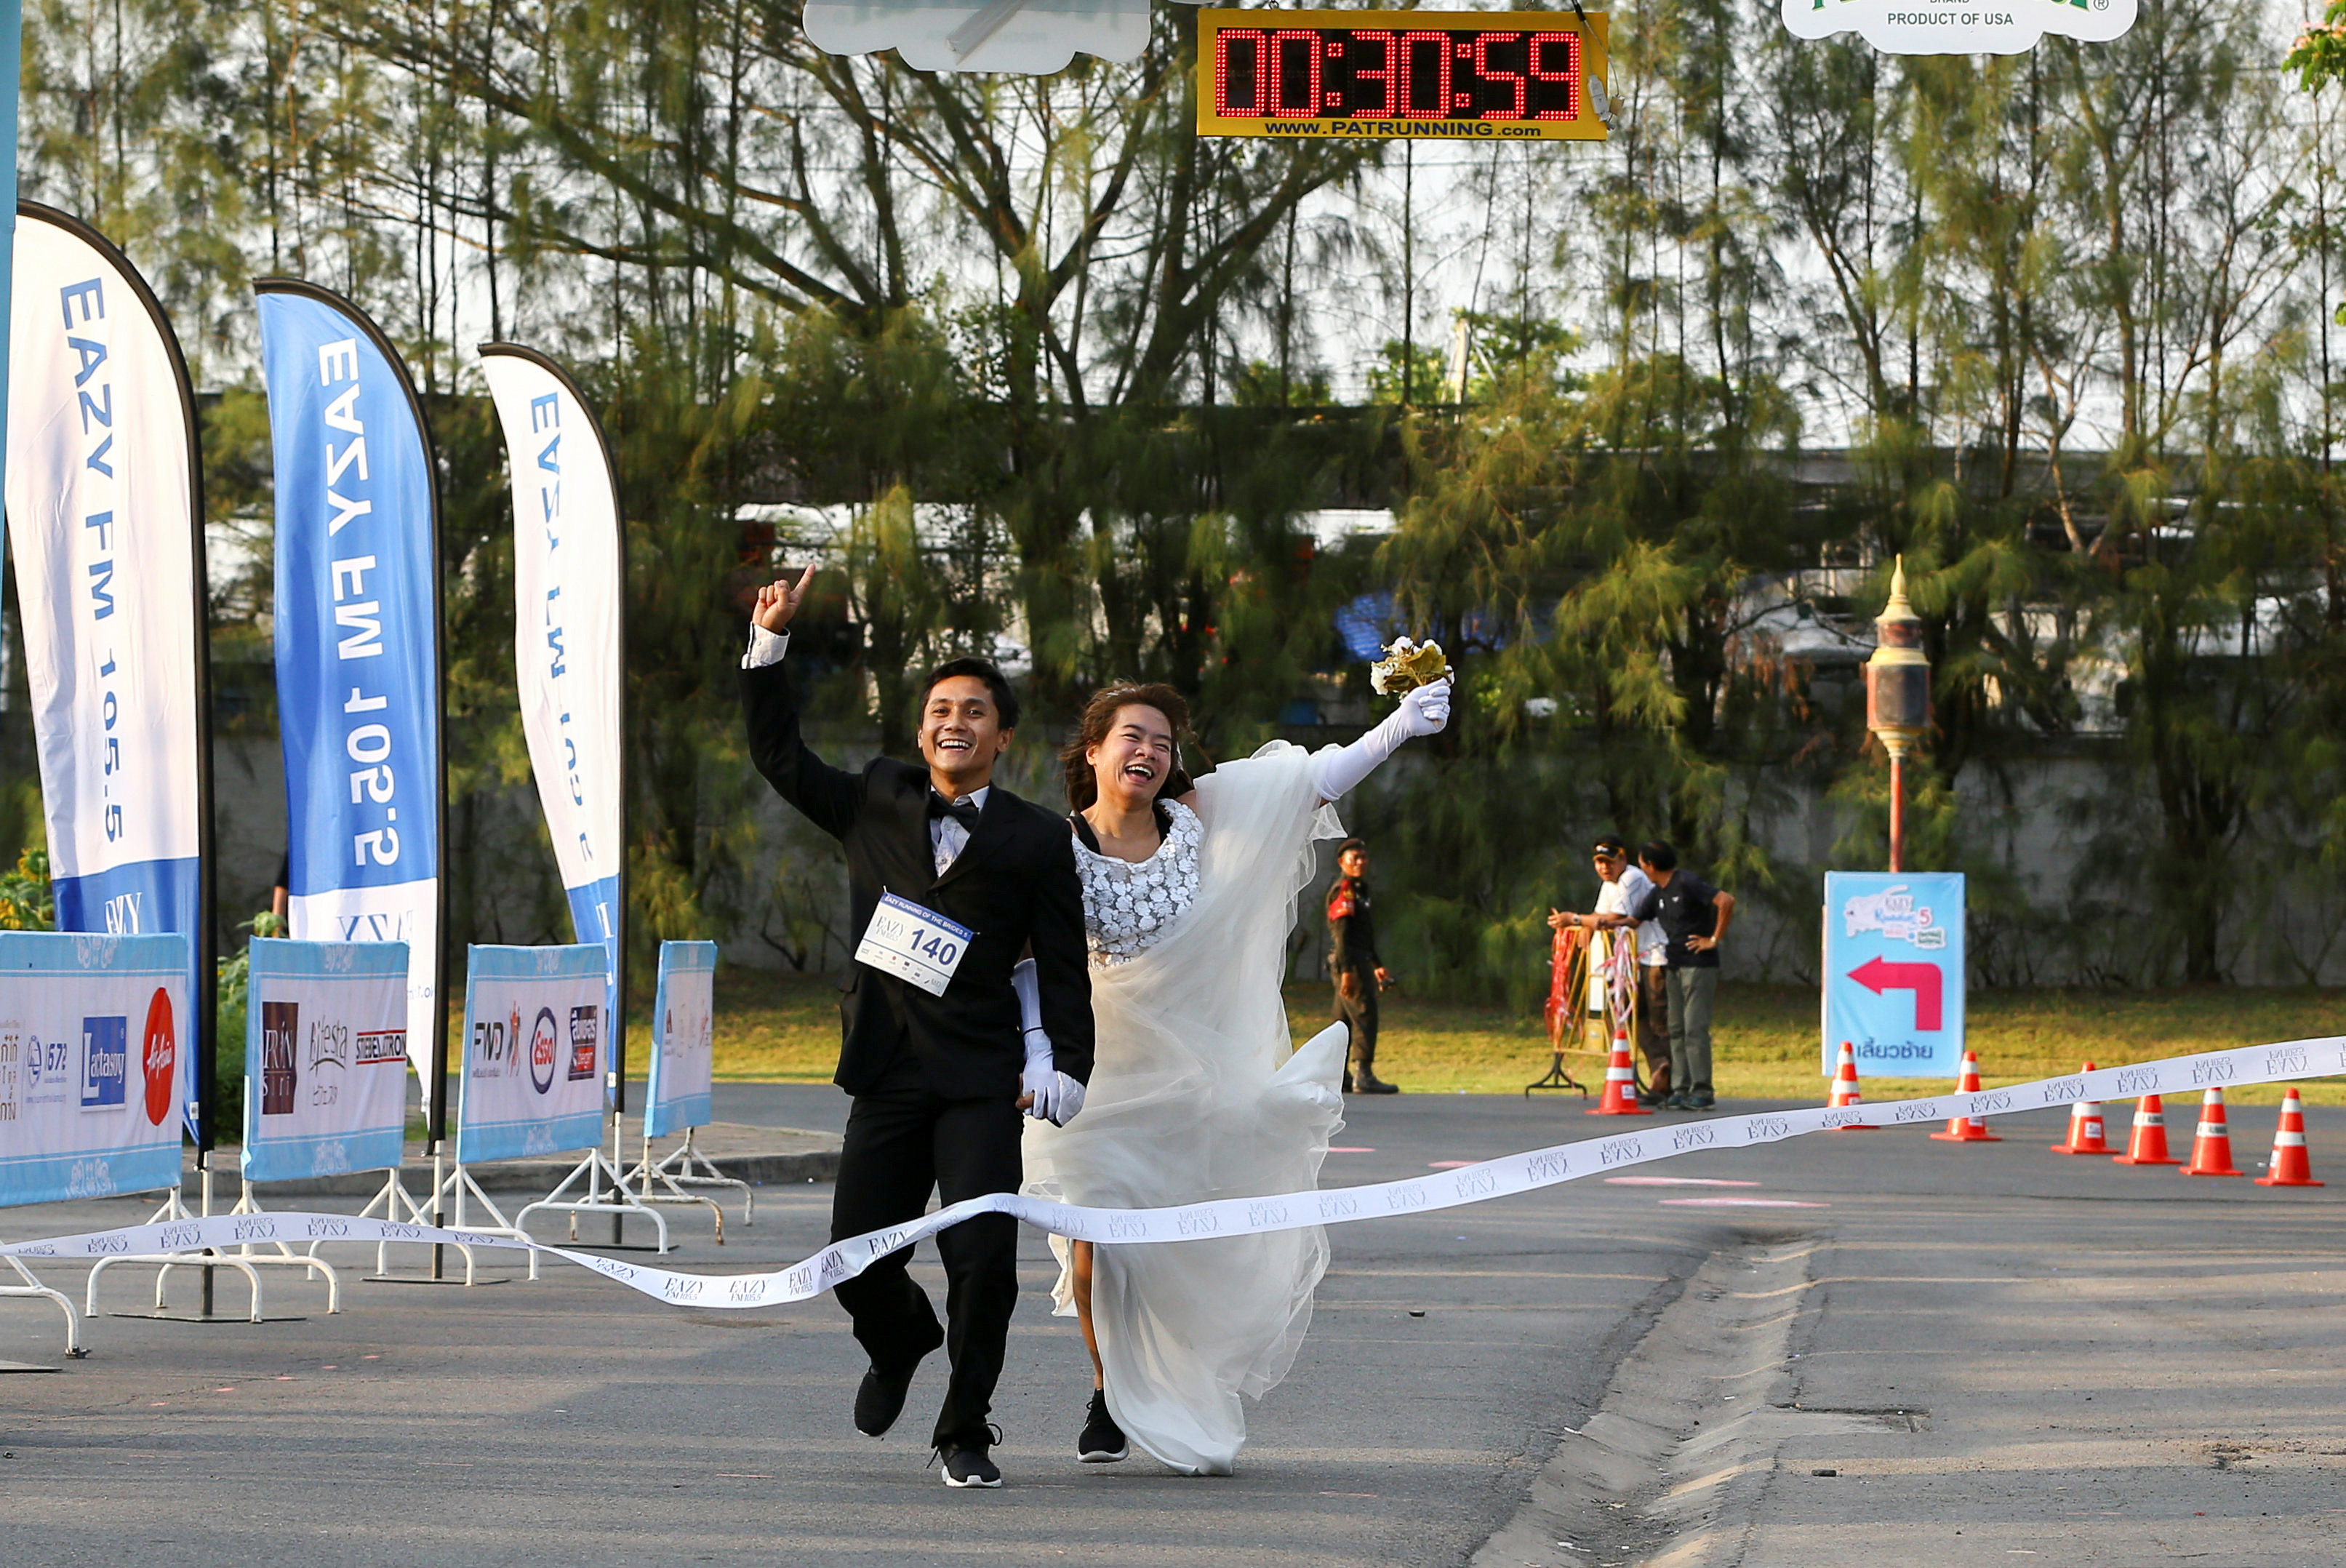 250 couples race in Thailand's 'Running of the Brides'